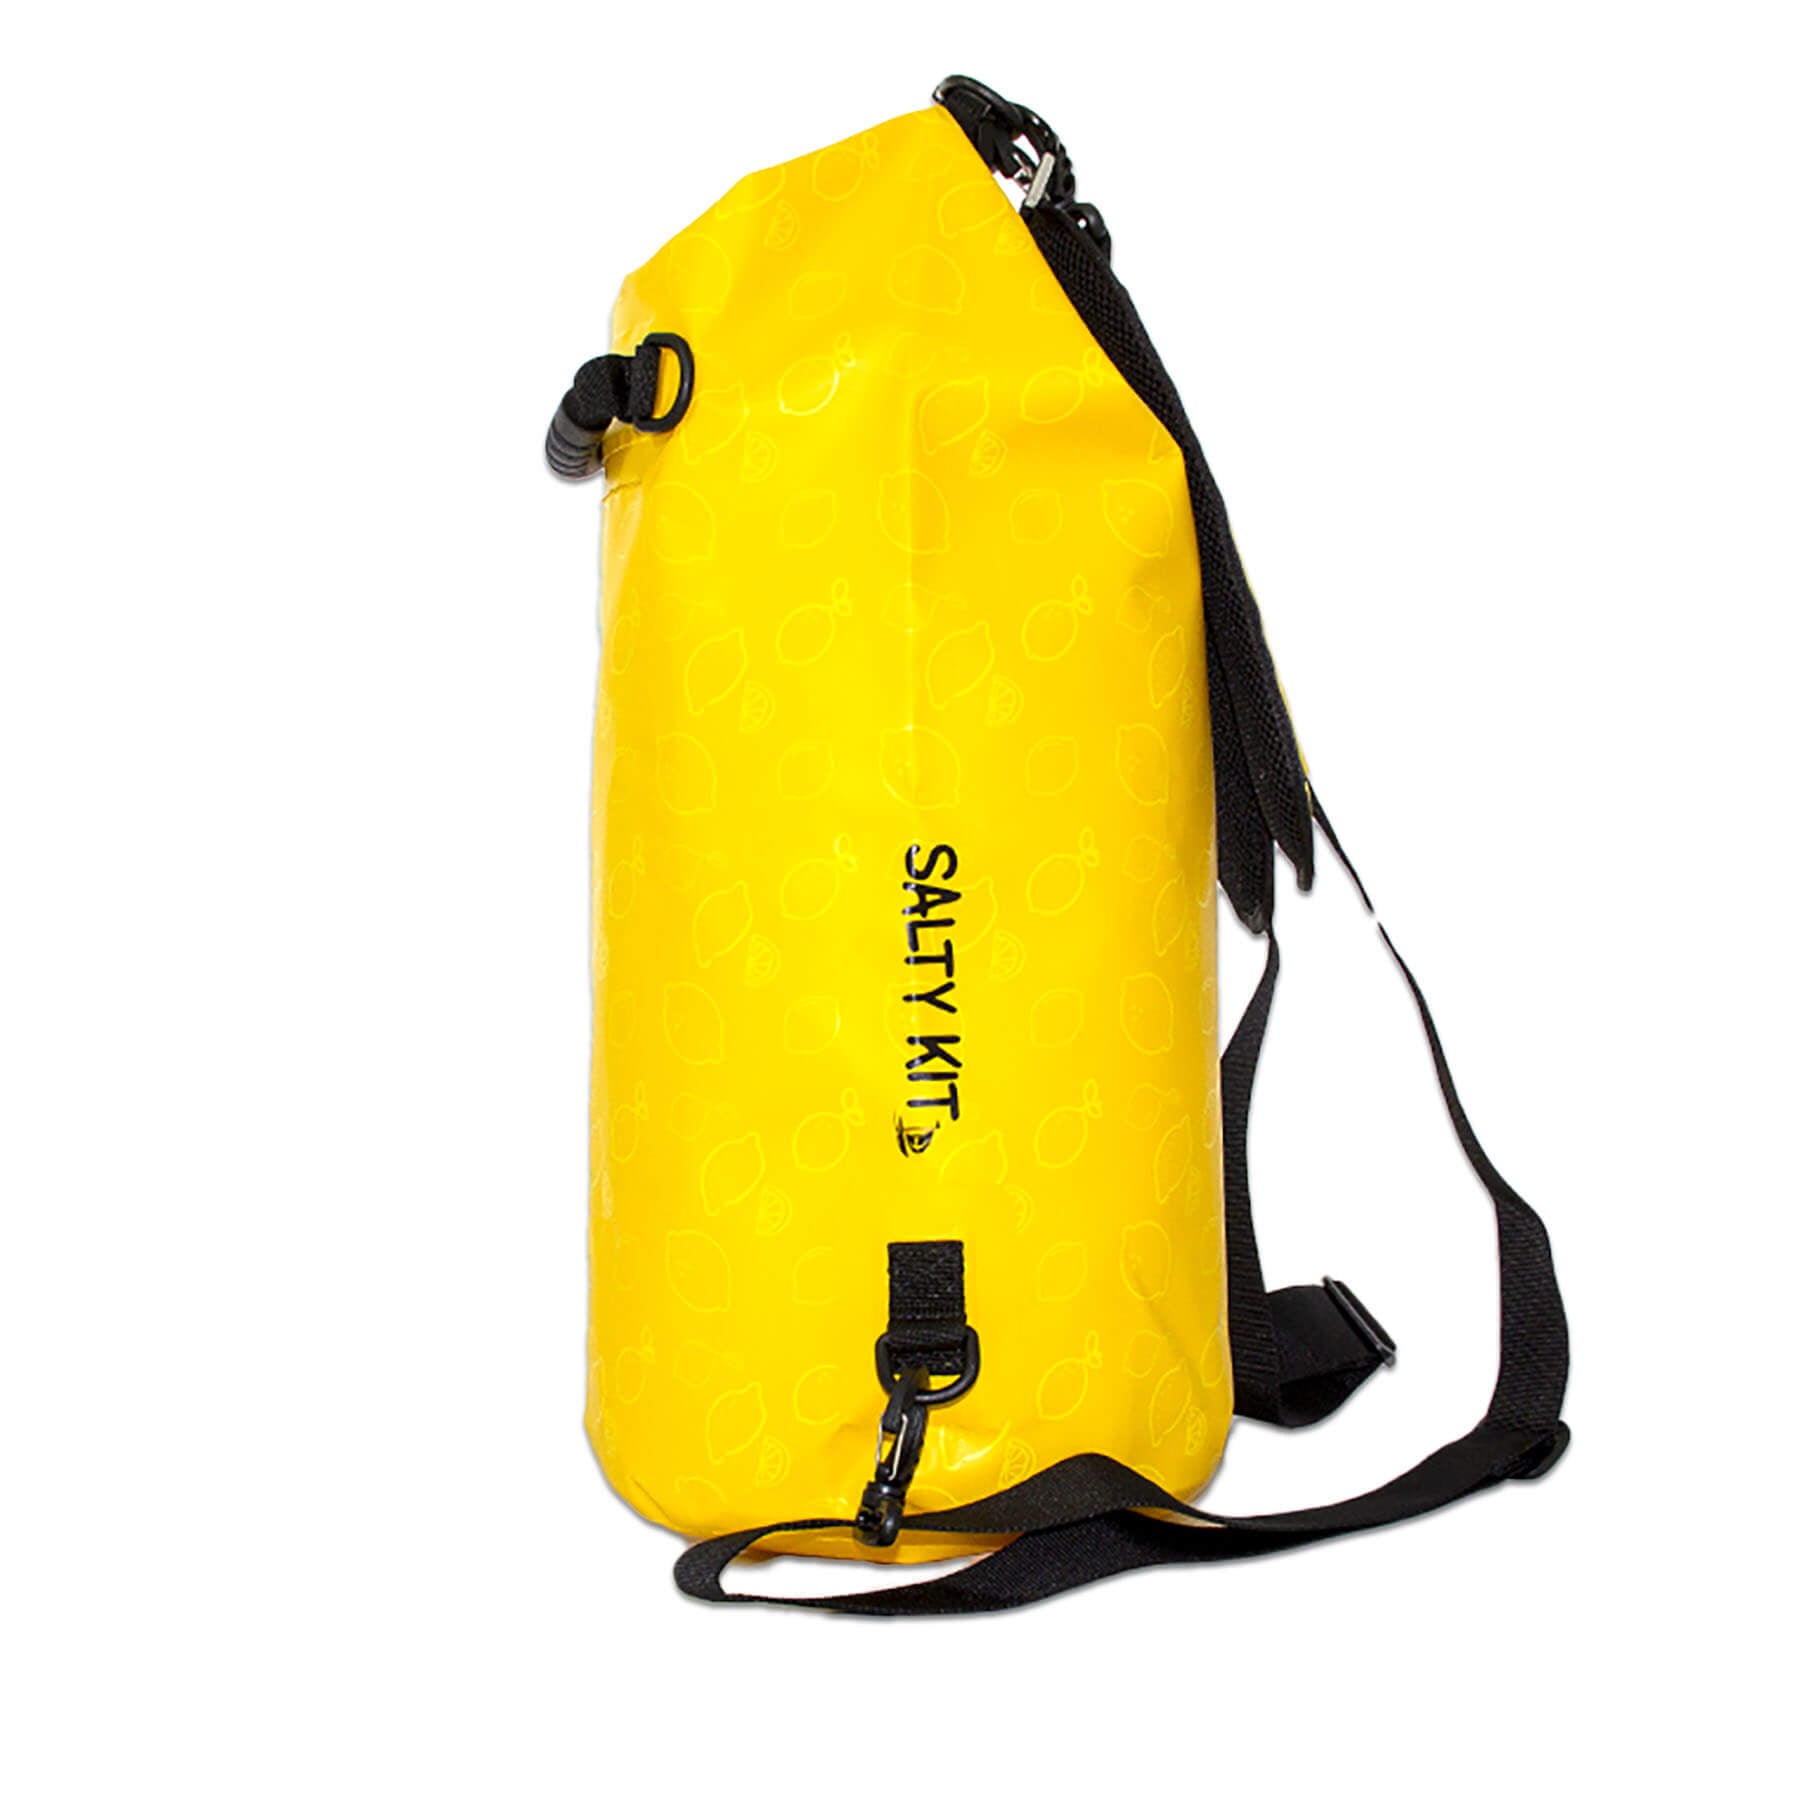 waterproof dry bag 20 litres with detachable comfort straps, D rings and handle in yellow with lemon print design side view